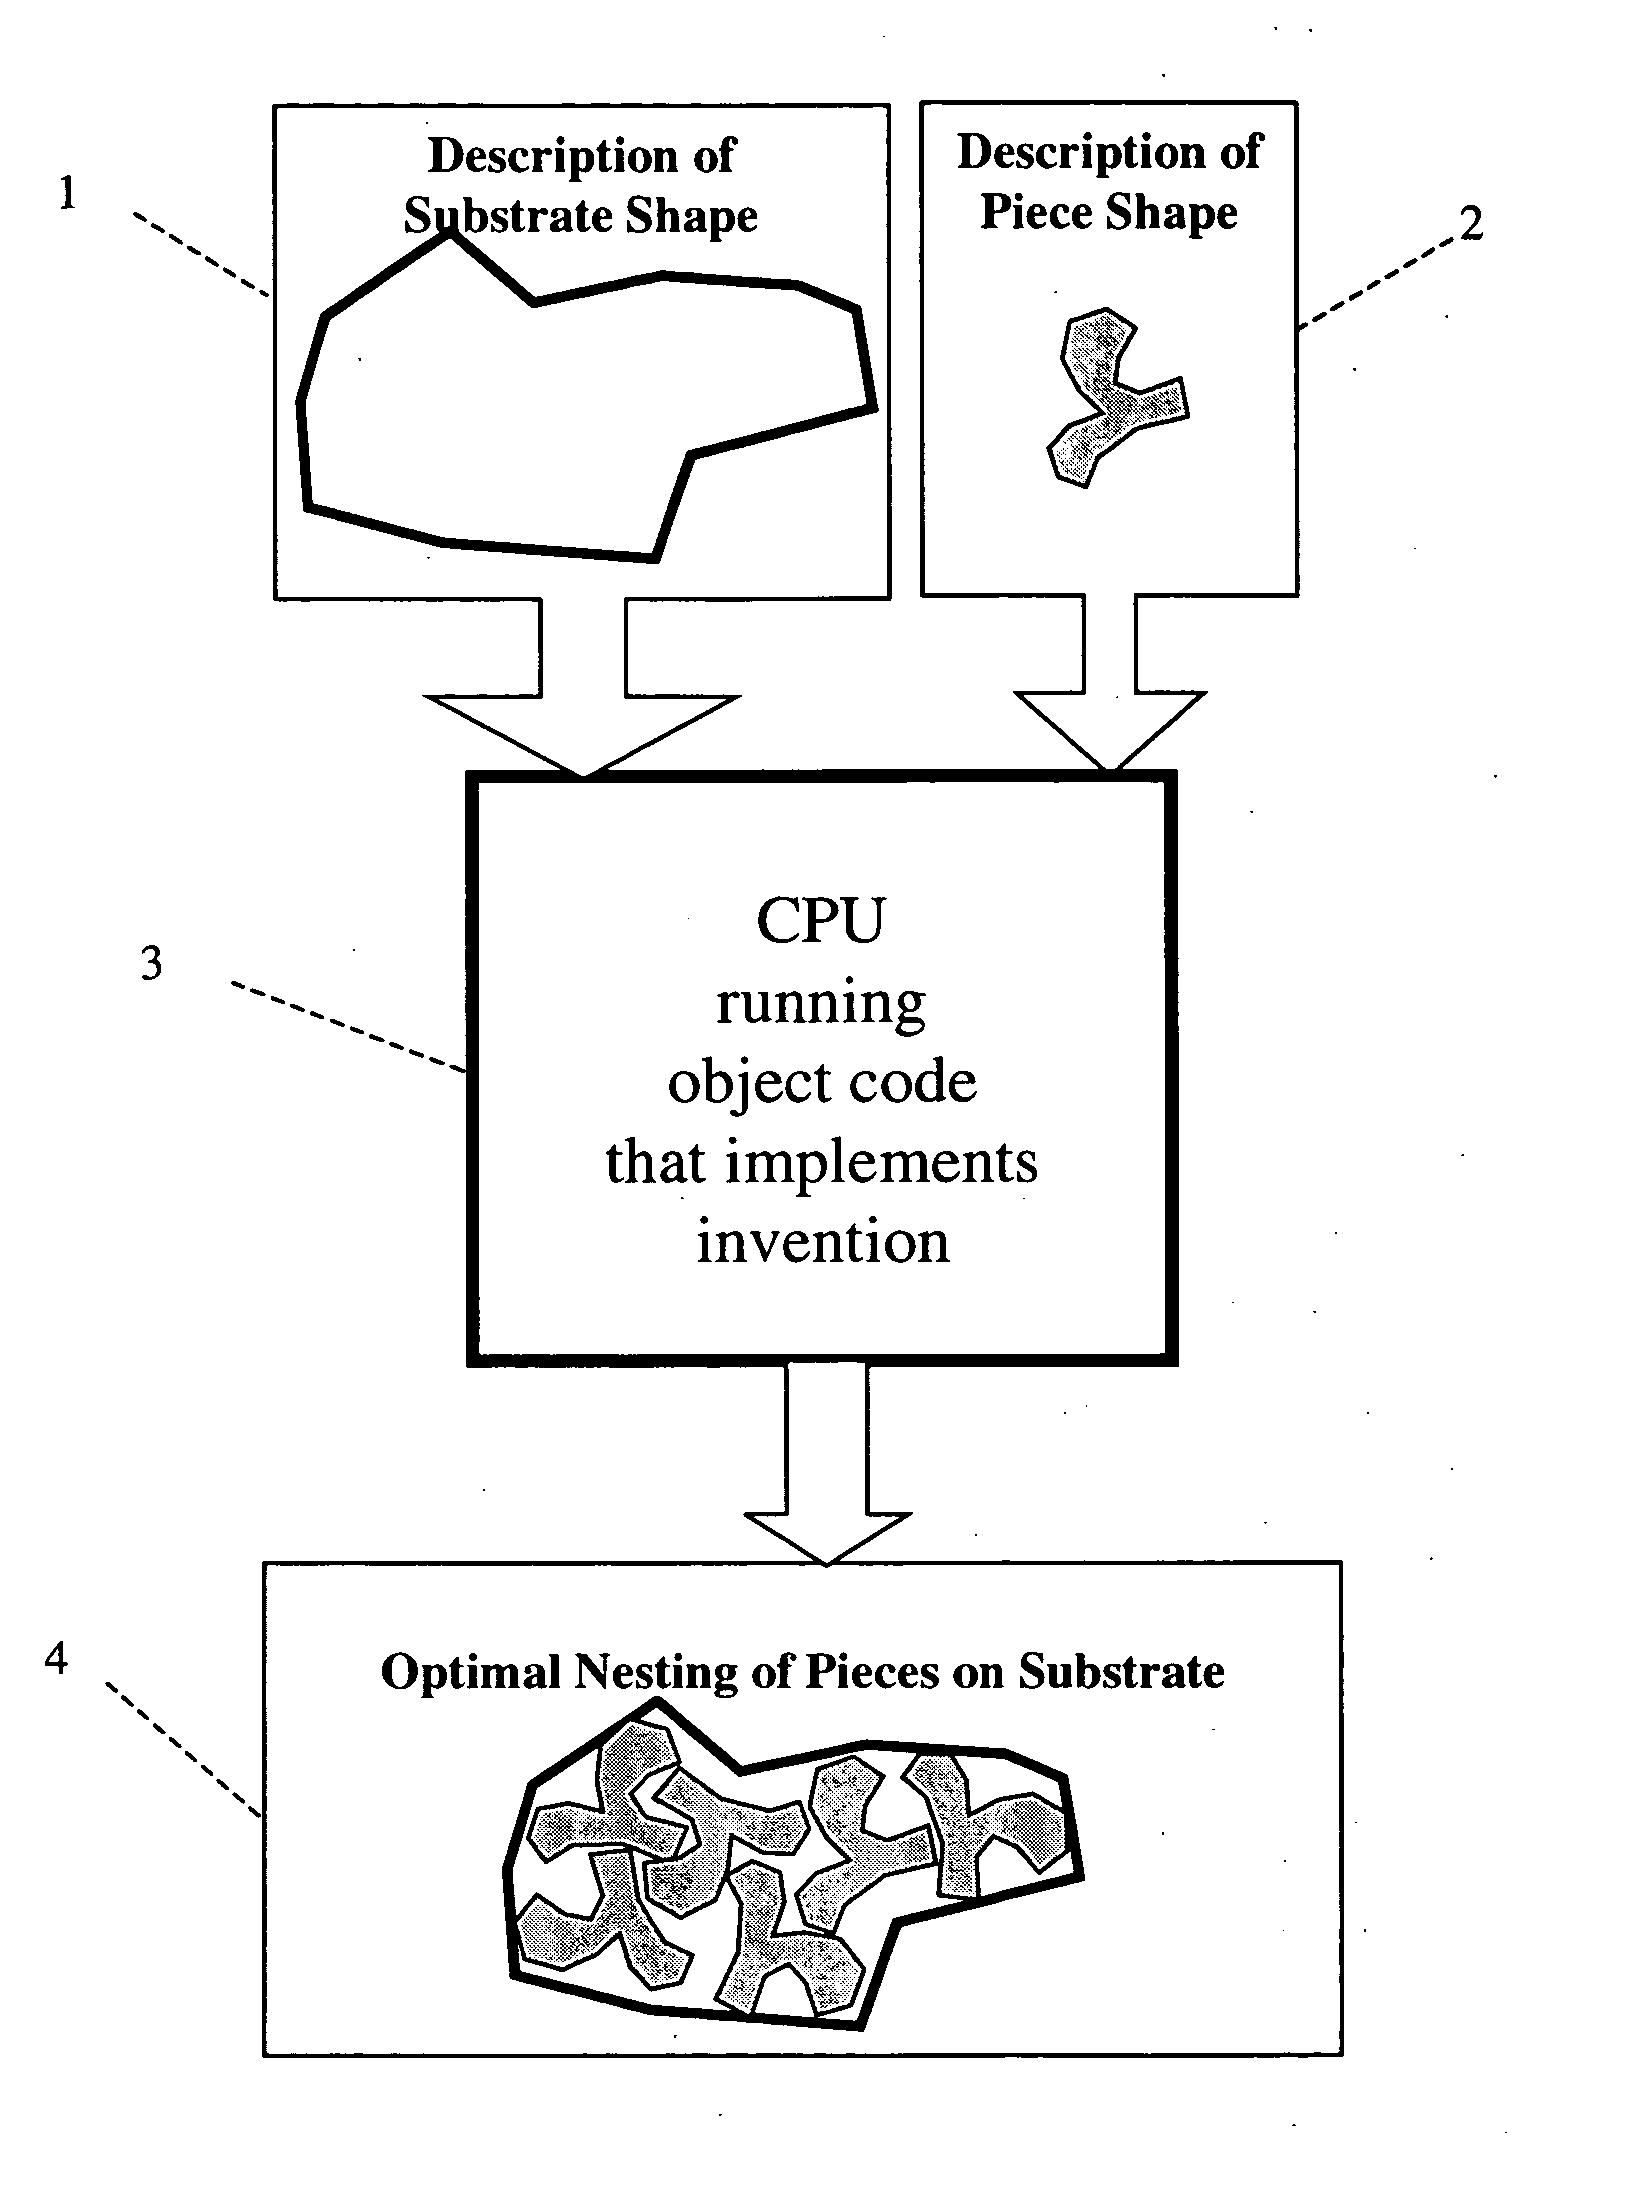 System and method to solve shape nesting problems